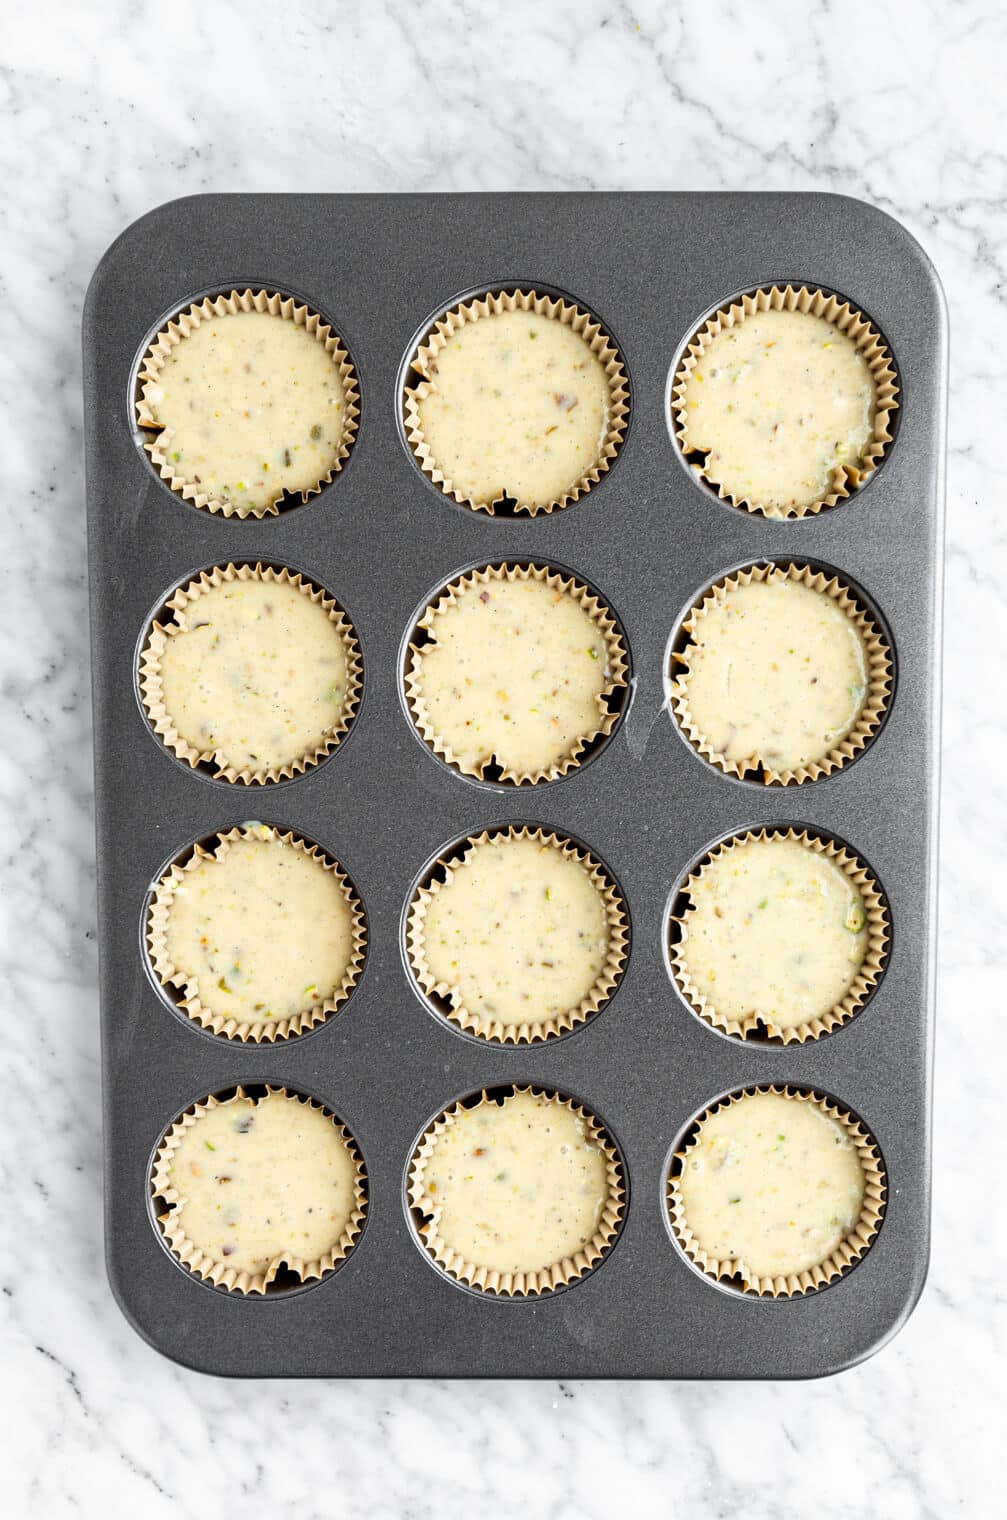 Muffin batter in a cupcake baking tin lined with muffin liners.